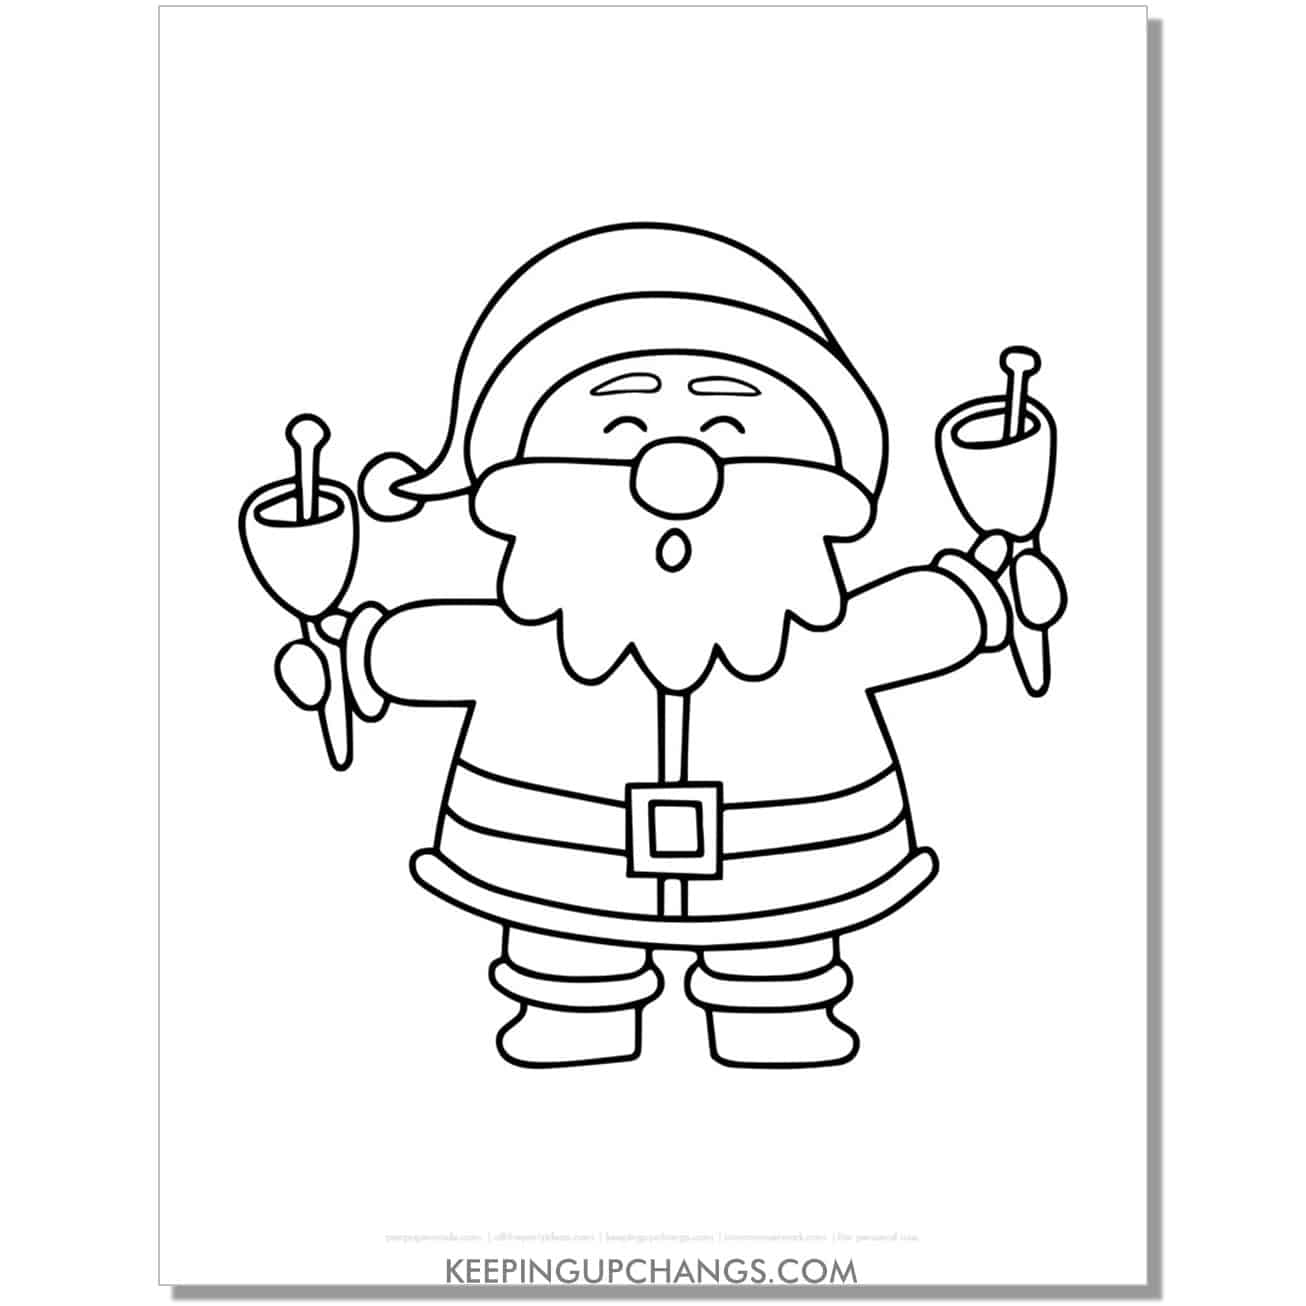 free santa with jingle bells outline, template, cut out, coloring page.